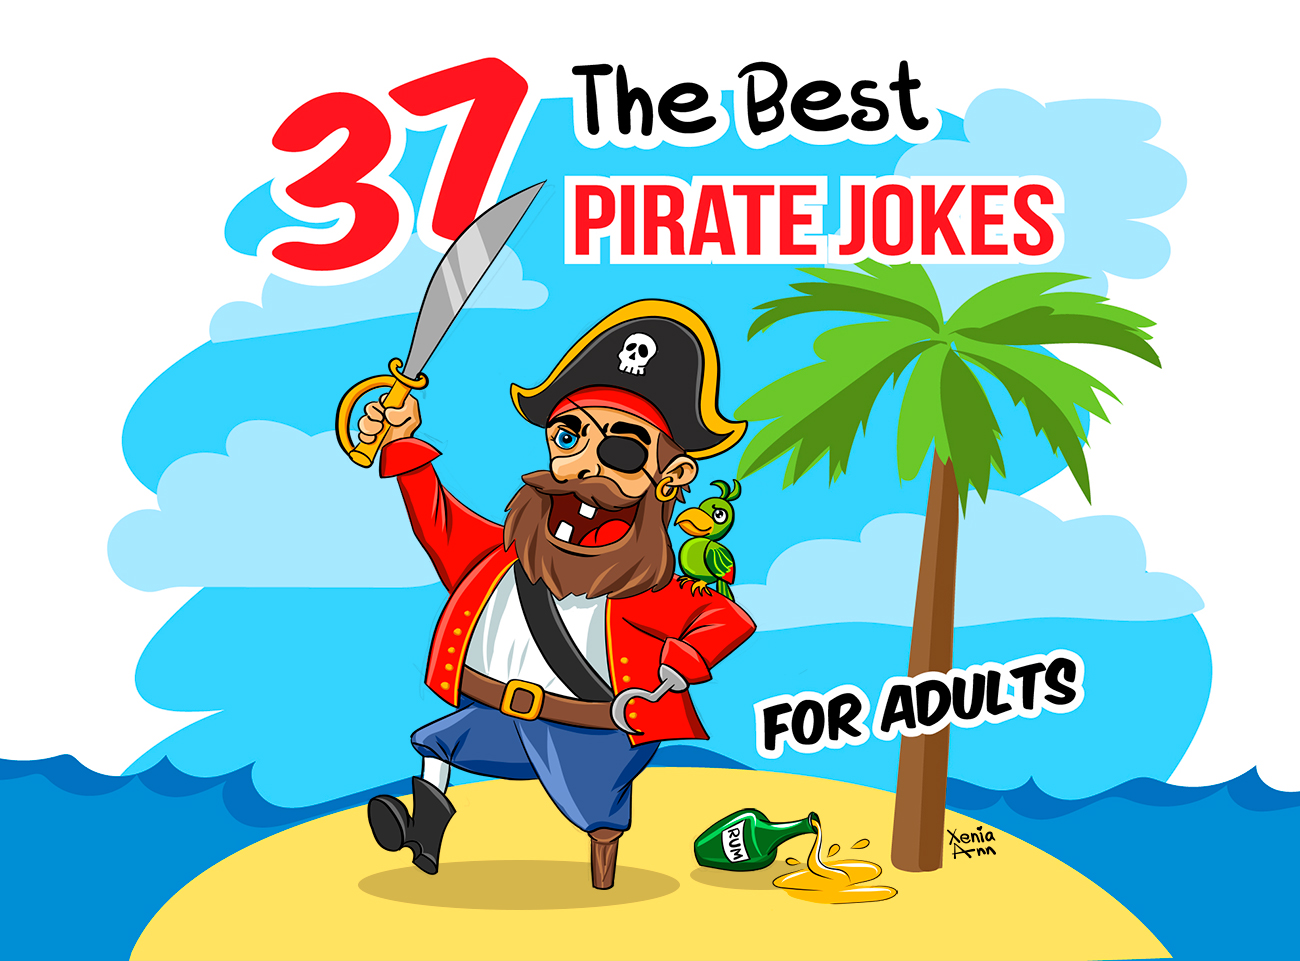 37 Funny Dirty Pirate Jokes Memes And Puns For Adults Diy Blog